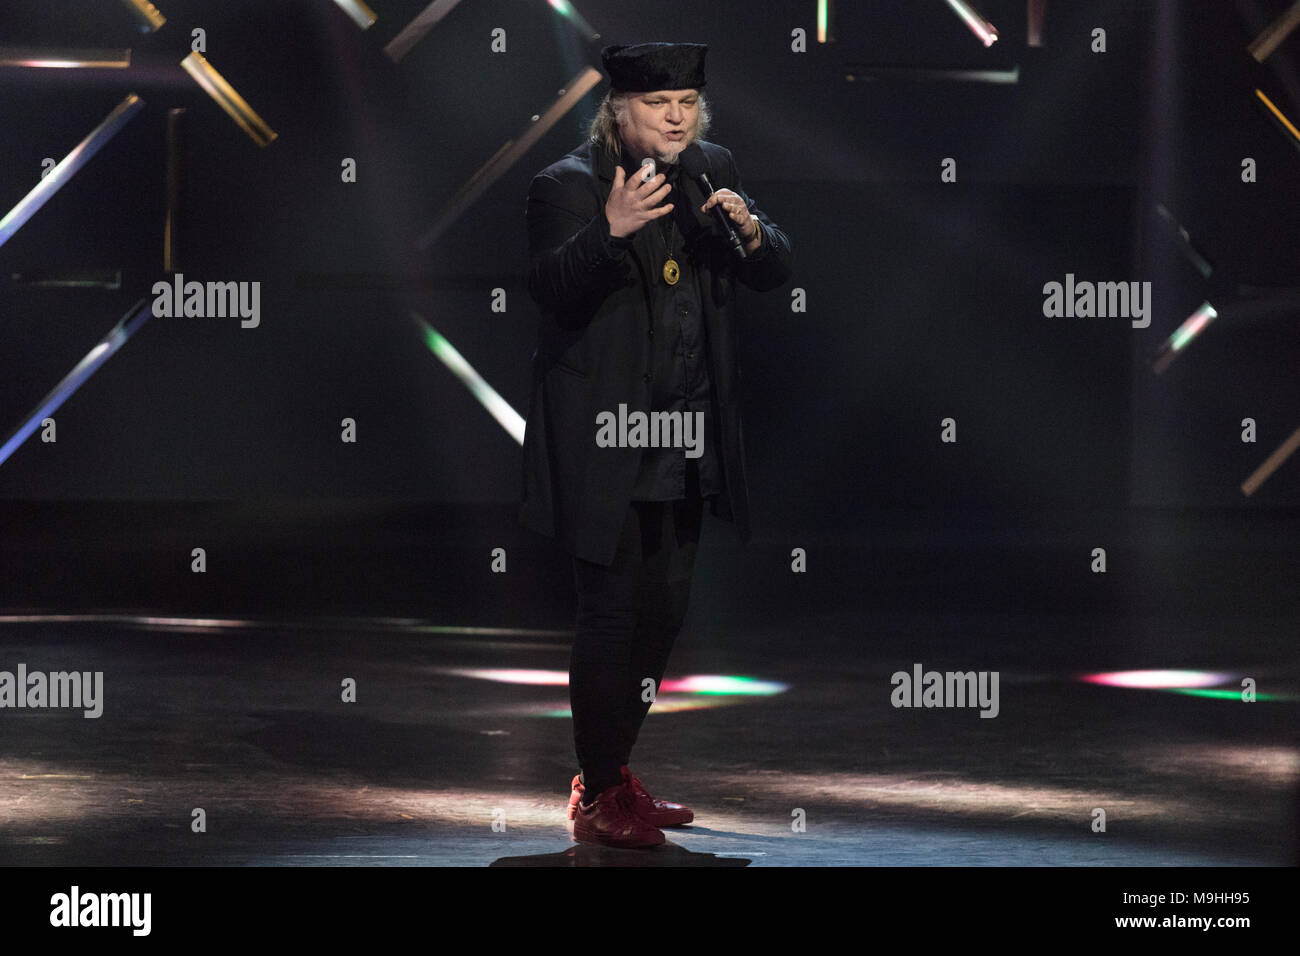 Norway, Oslo - February 25, 2018. The Norwegian blues guitarist Knut Reiersrud presents an award during the Norwegian Grammy Awards, Spellemannprisen 2017, at Oslo Konserthus in Oslo. (Photo credit: Gonzales Photo - Stian S. Moller). Stock Photo